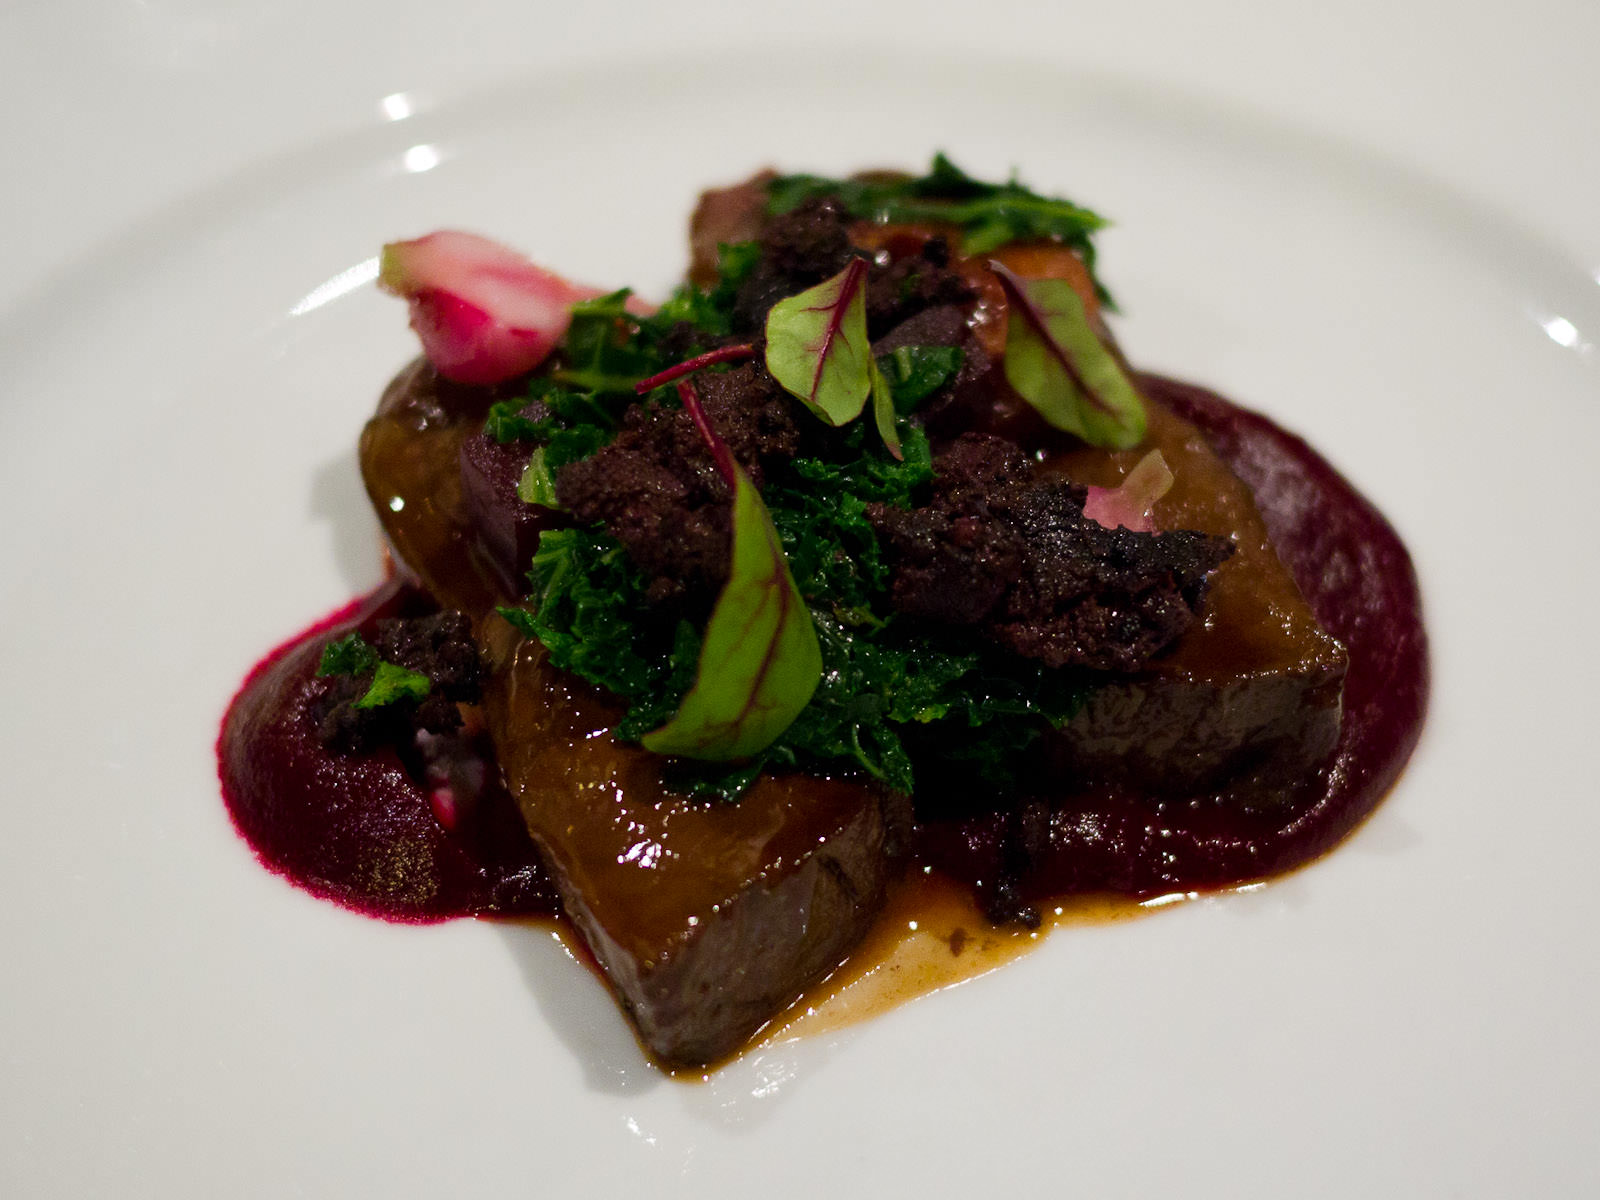 Oven roasted venison rump with black pudding, beetroot, plums and seared kale